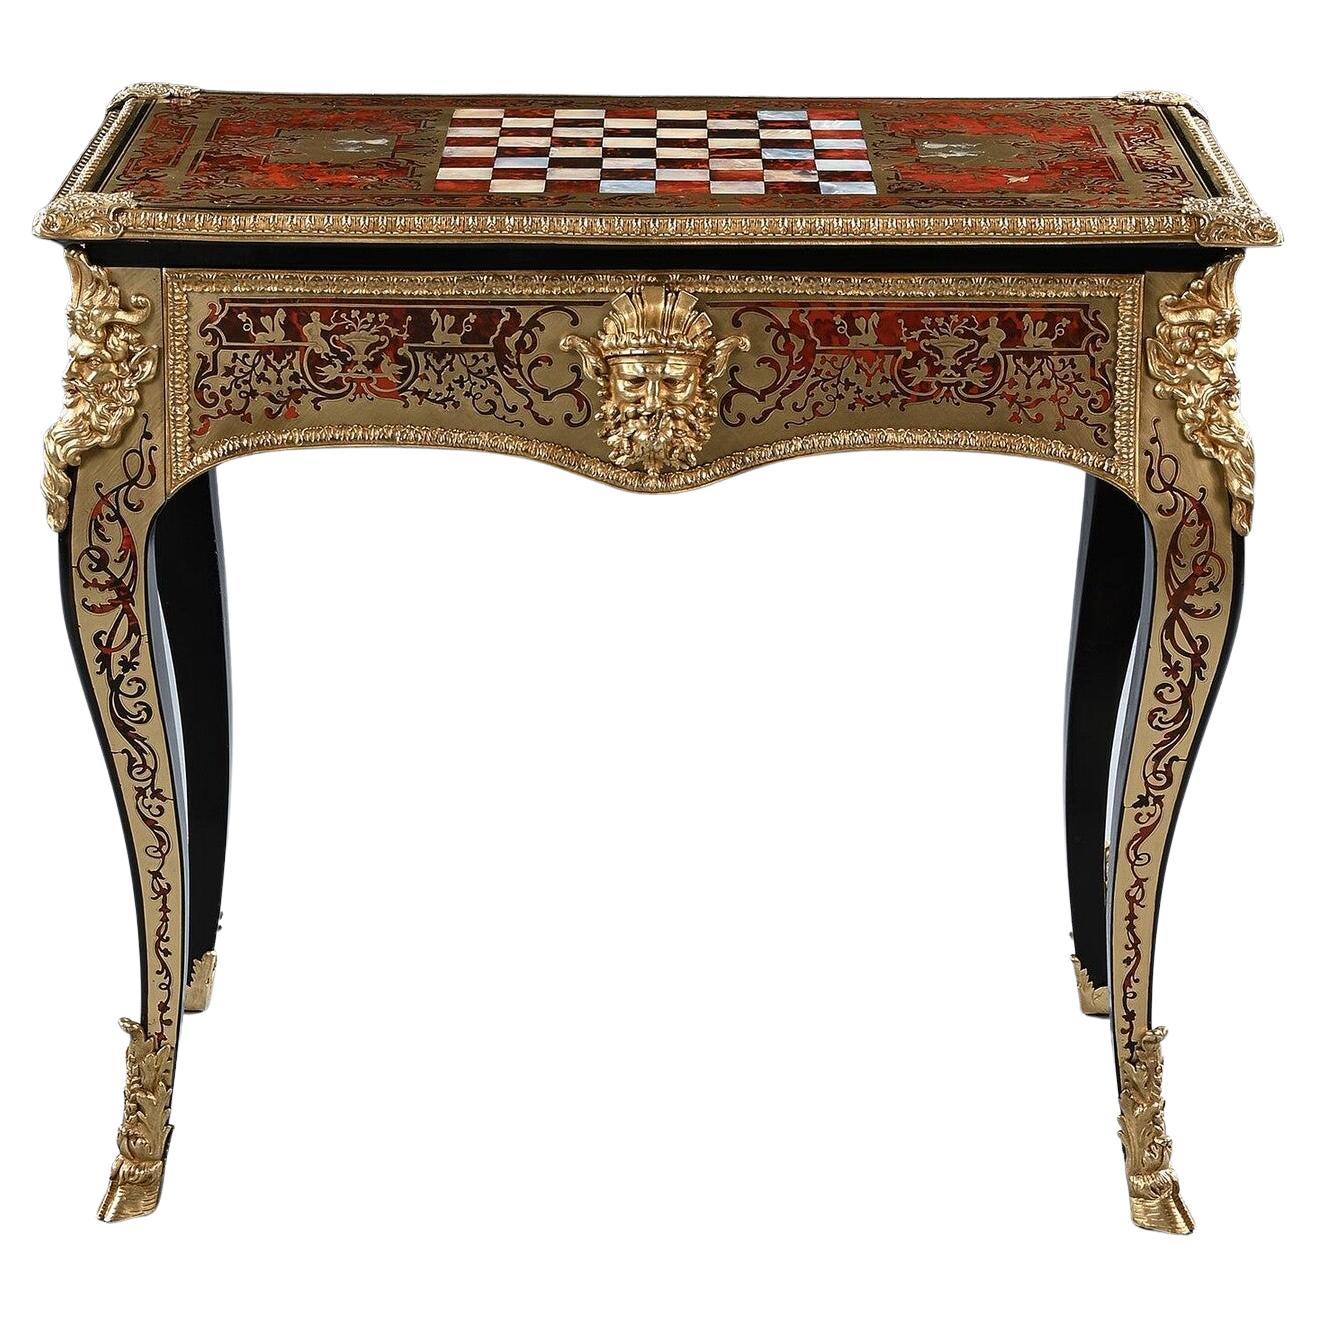 An Exceptional George Iv Period Boulle Games Table Attributed to Thomas Parker For Sale